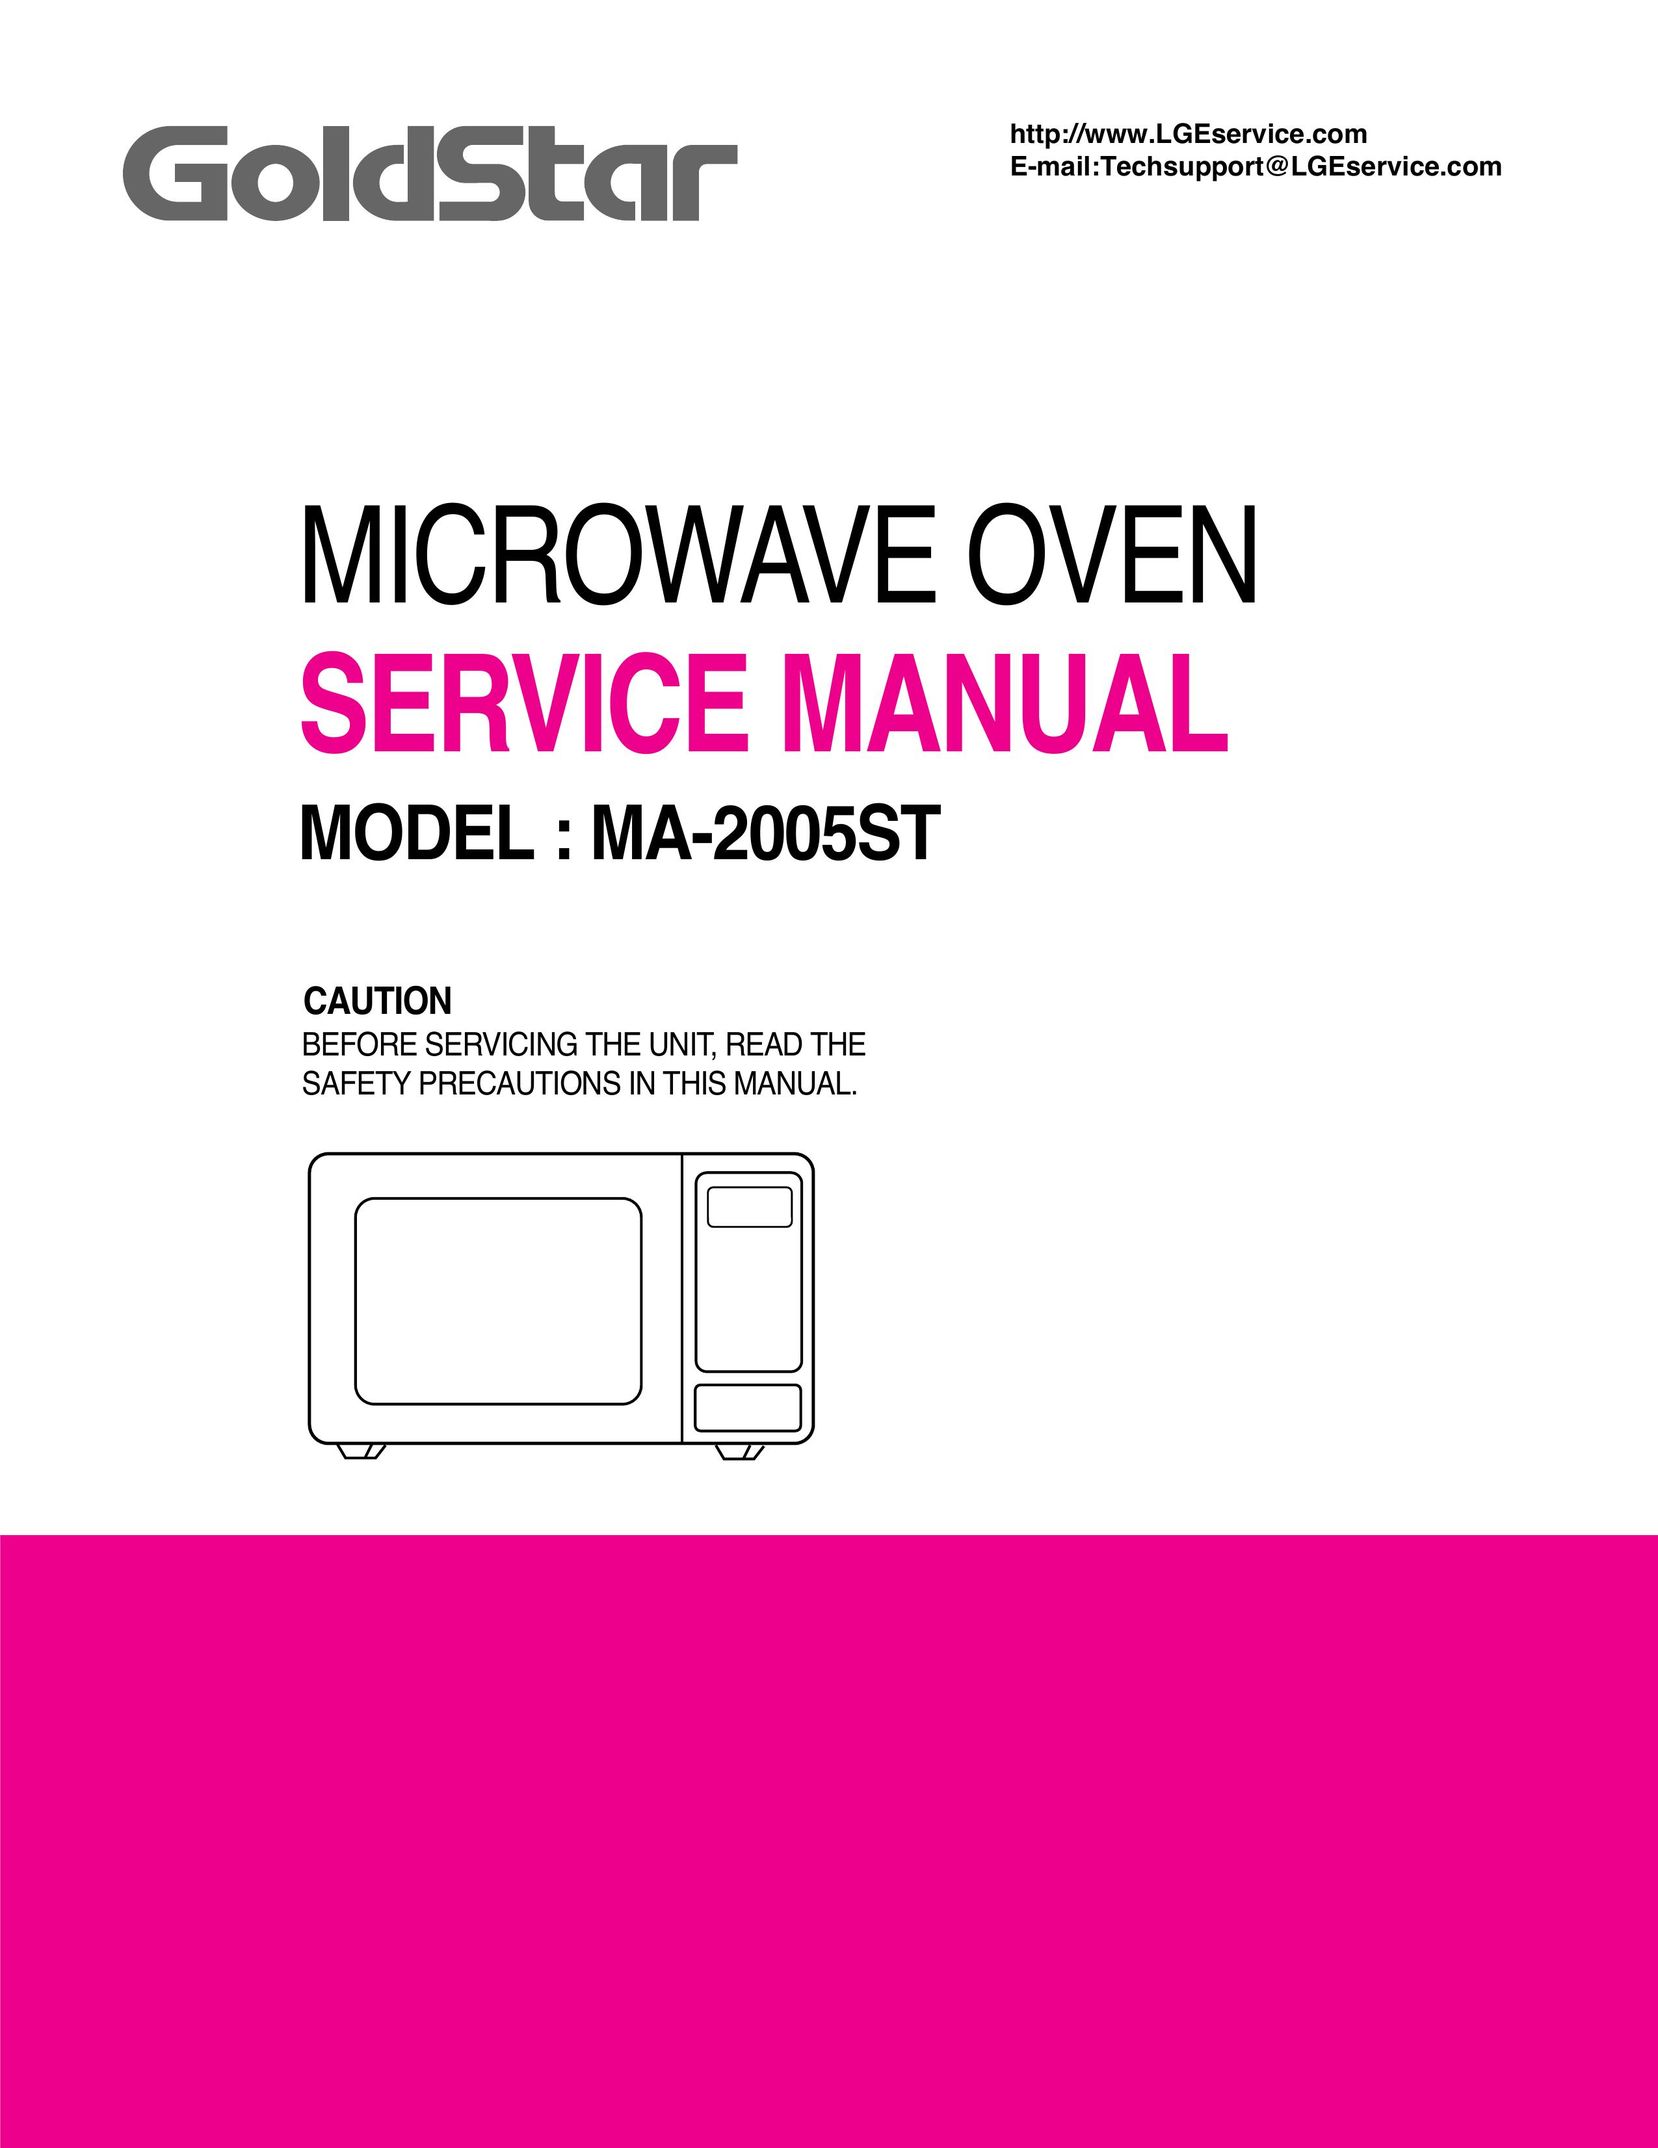 Goldstar MA-2005ST Microwave Oven User Manual